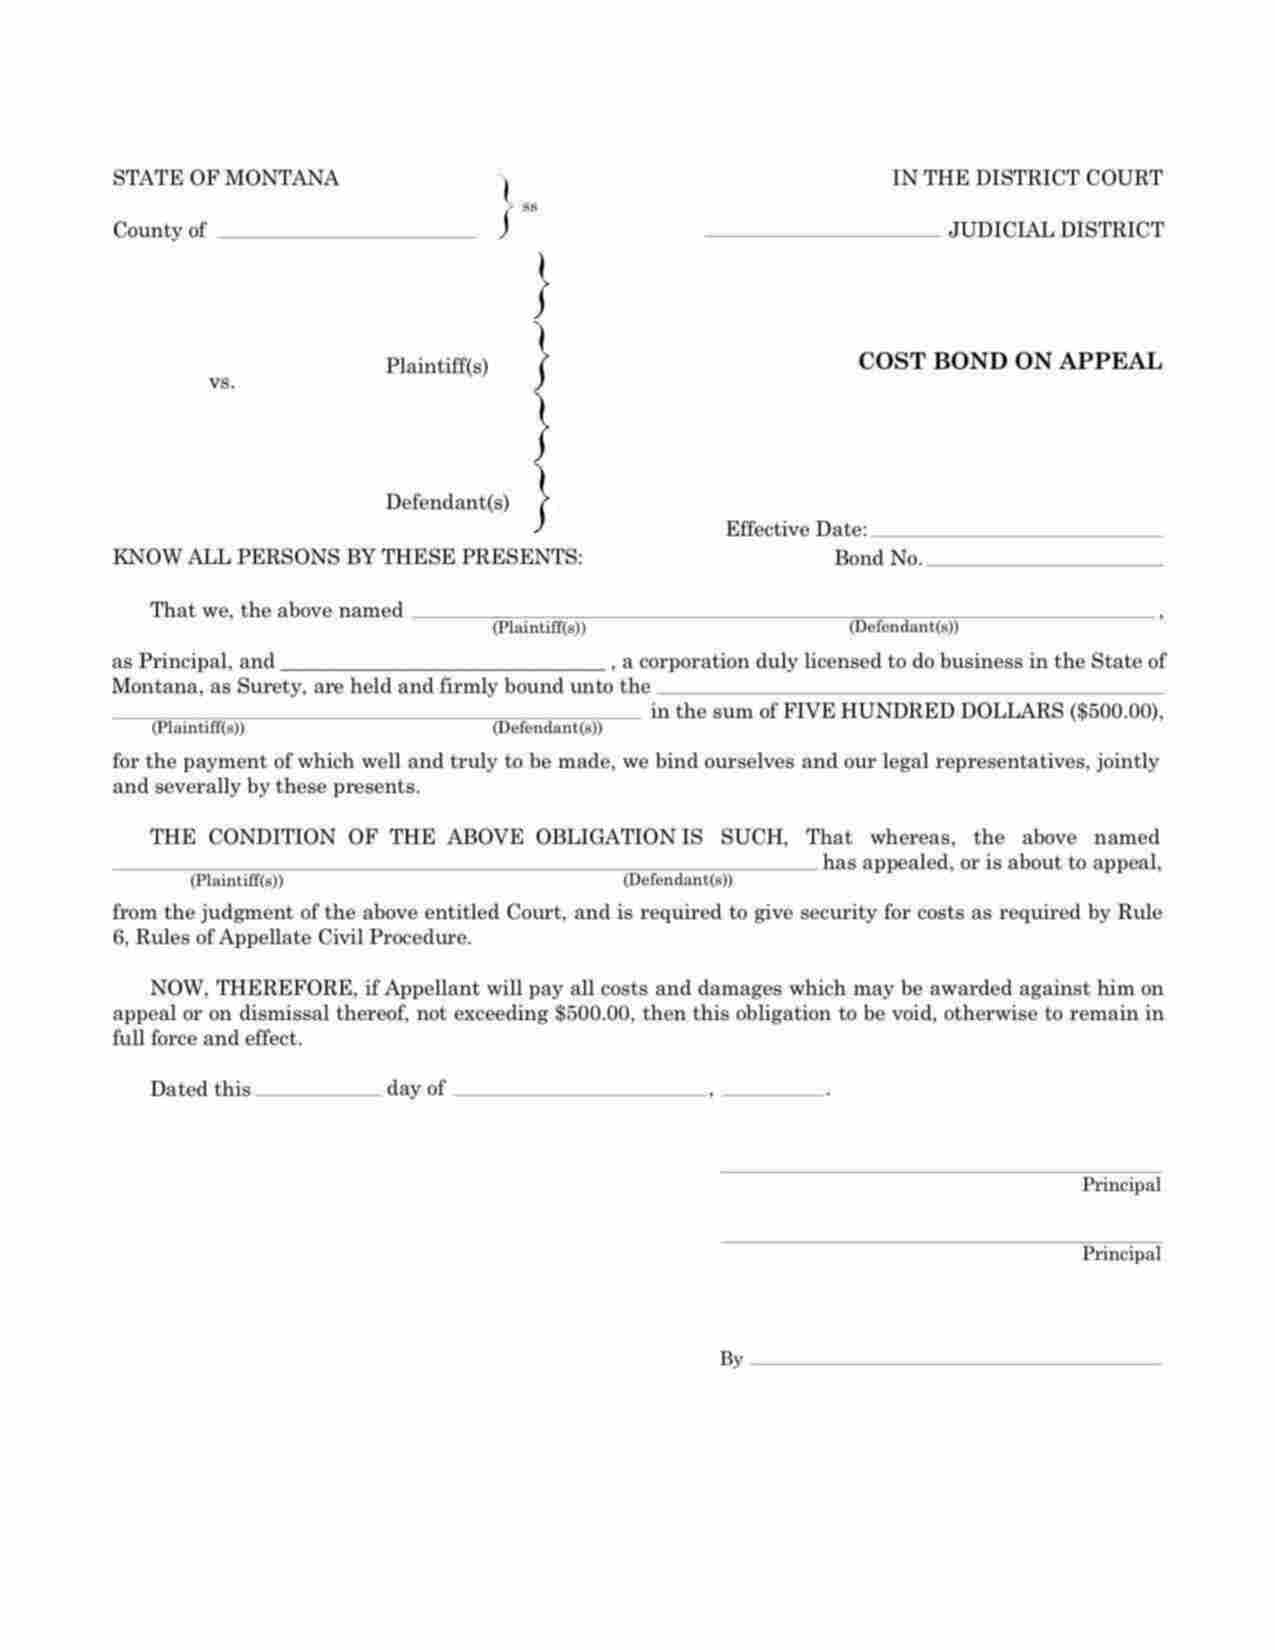 Montana Cost on Appeal Bond Form